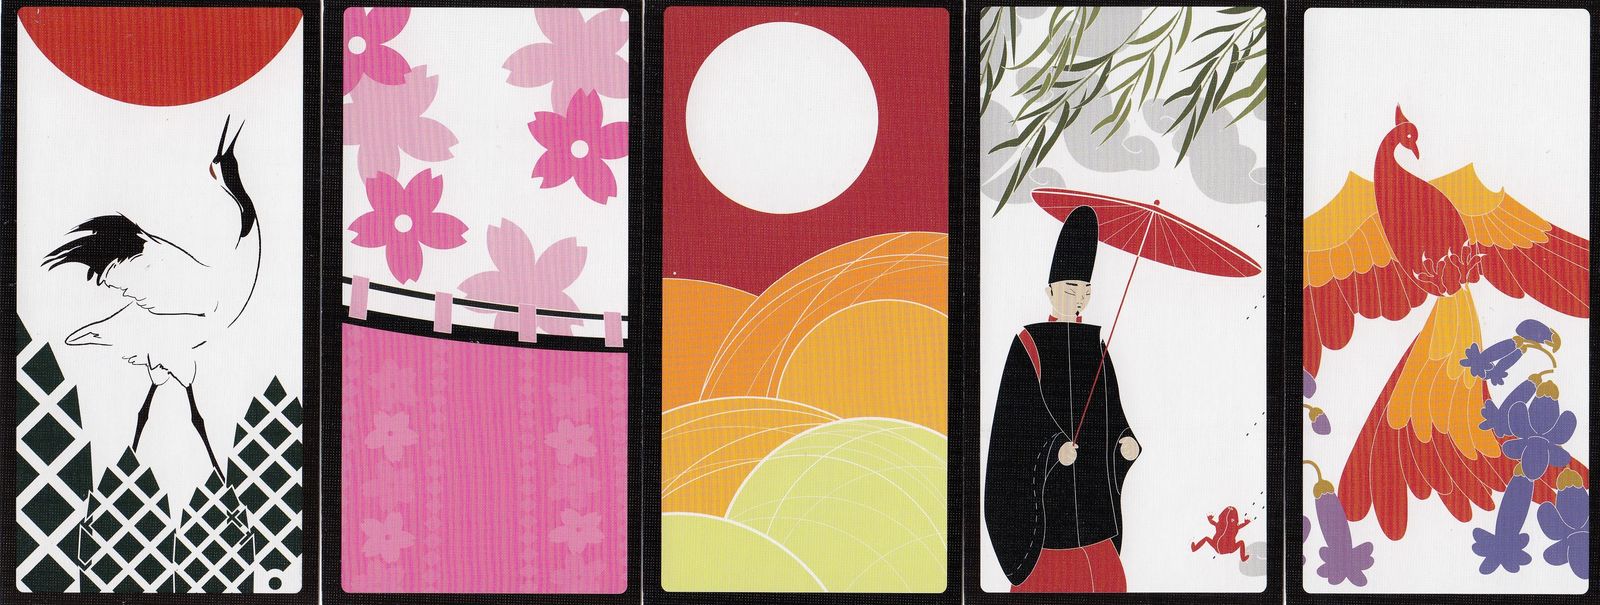 Five playing cards, the first with a crane with its neck arched back and pine trees patterened with criss-crossing stripes, the second with cherry blossoms behind a curtain bearing a cherry blossom pattern, the third of a white moon in a red sky over circular hills in orange and yellow, the fourth with a man holding an umbrella and standing under a willow tree watching a frog, and the fifth with a Japanese phoenix beating its wings over realistically-shaped Paulownia flowers.